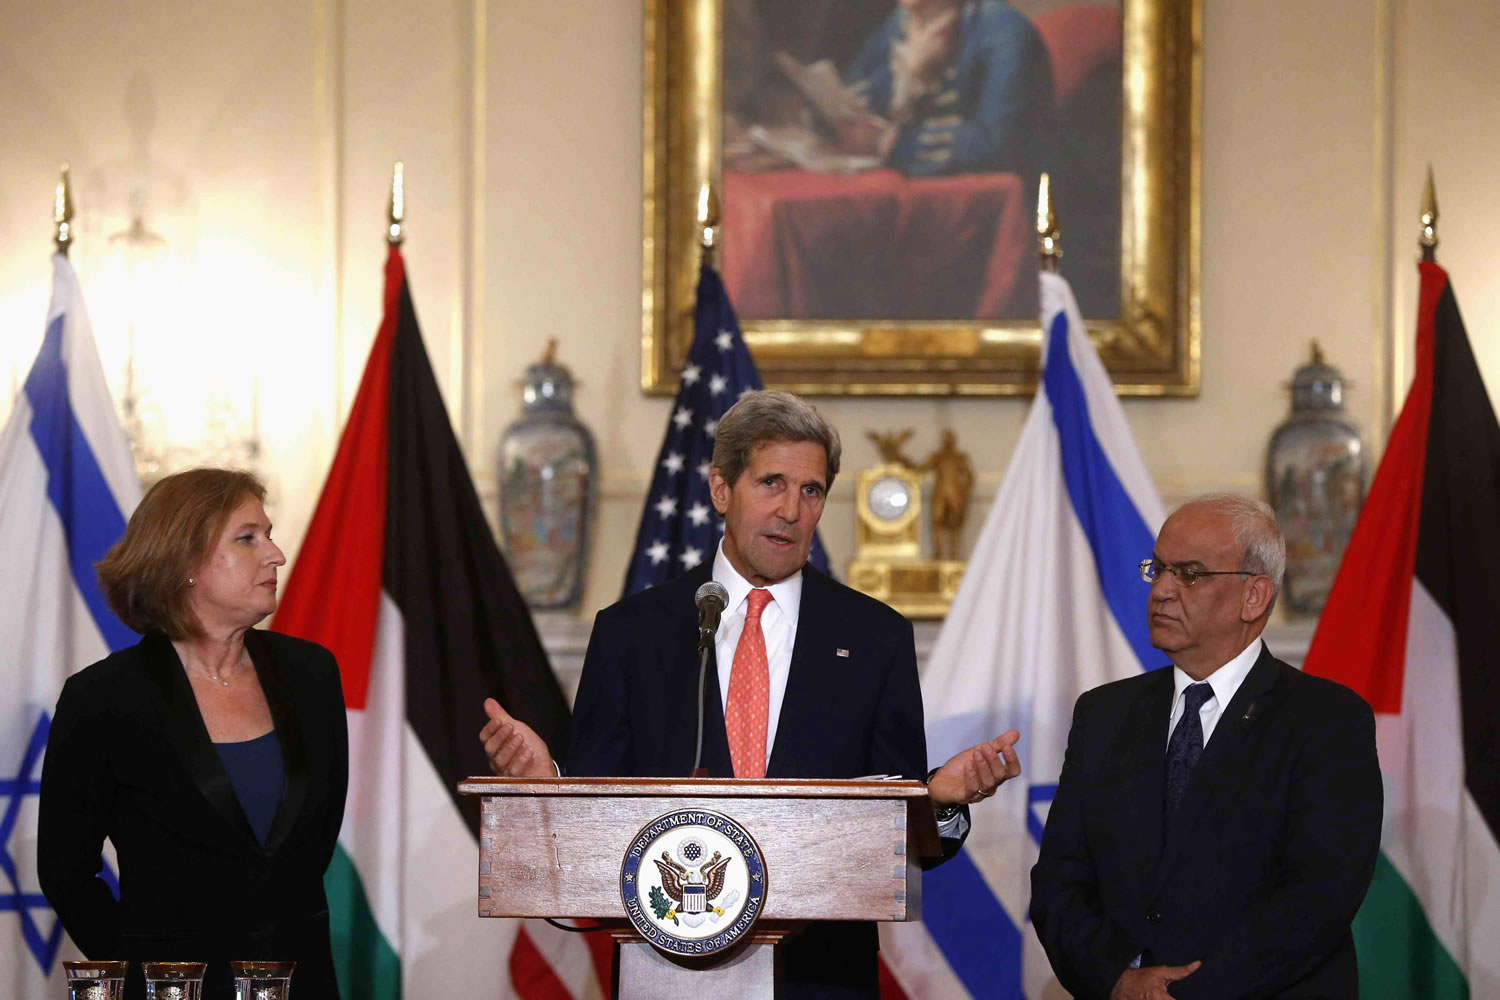 Secretary of State John Kerry stands with Israel's Justice Minister and chief negotiator Tzipi Livni, left, and Palestinian chief negotiator Saeb Erekat after the resumption of Israeli-Palestinian peace talks Tuesday at the State Department in Washington.